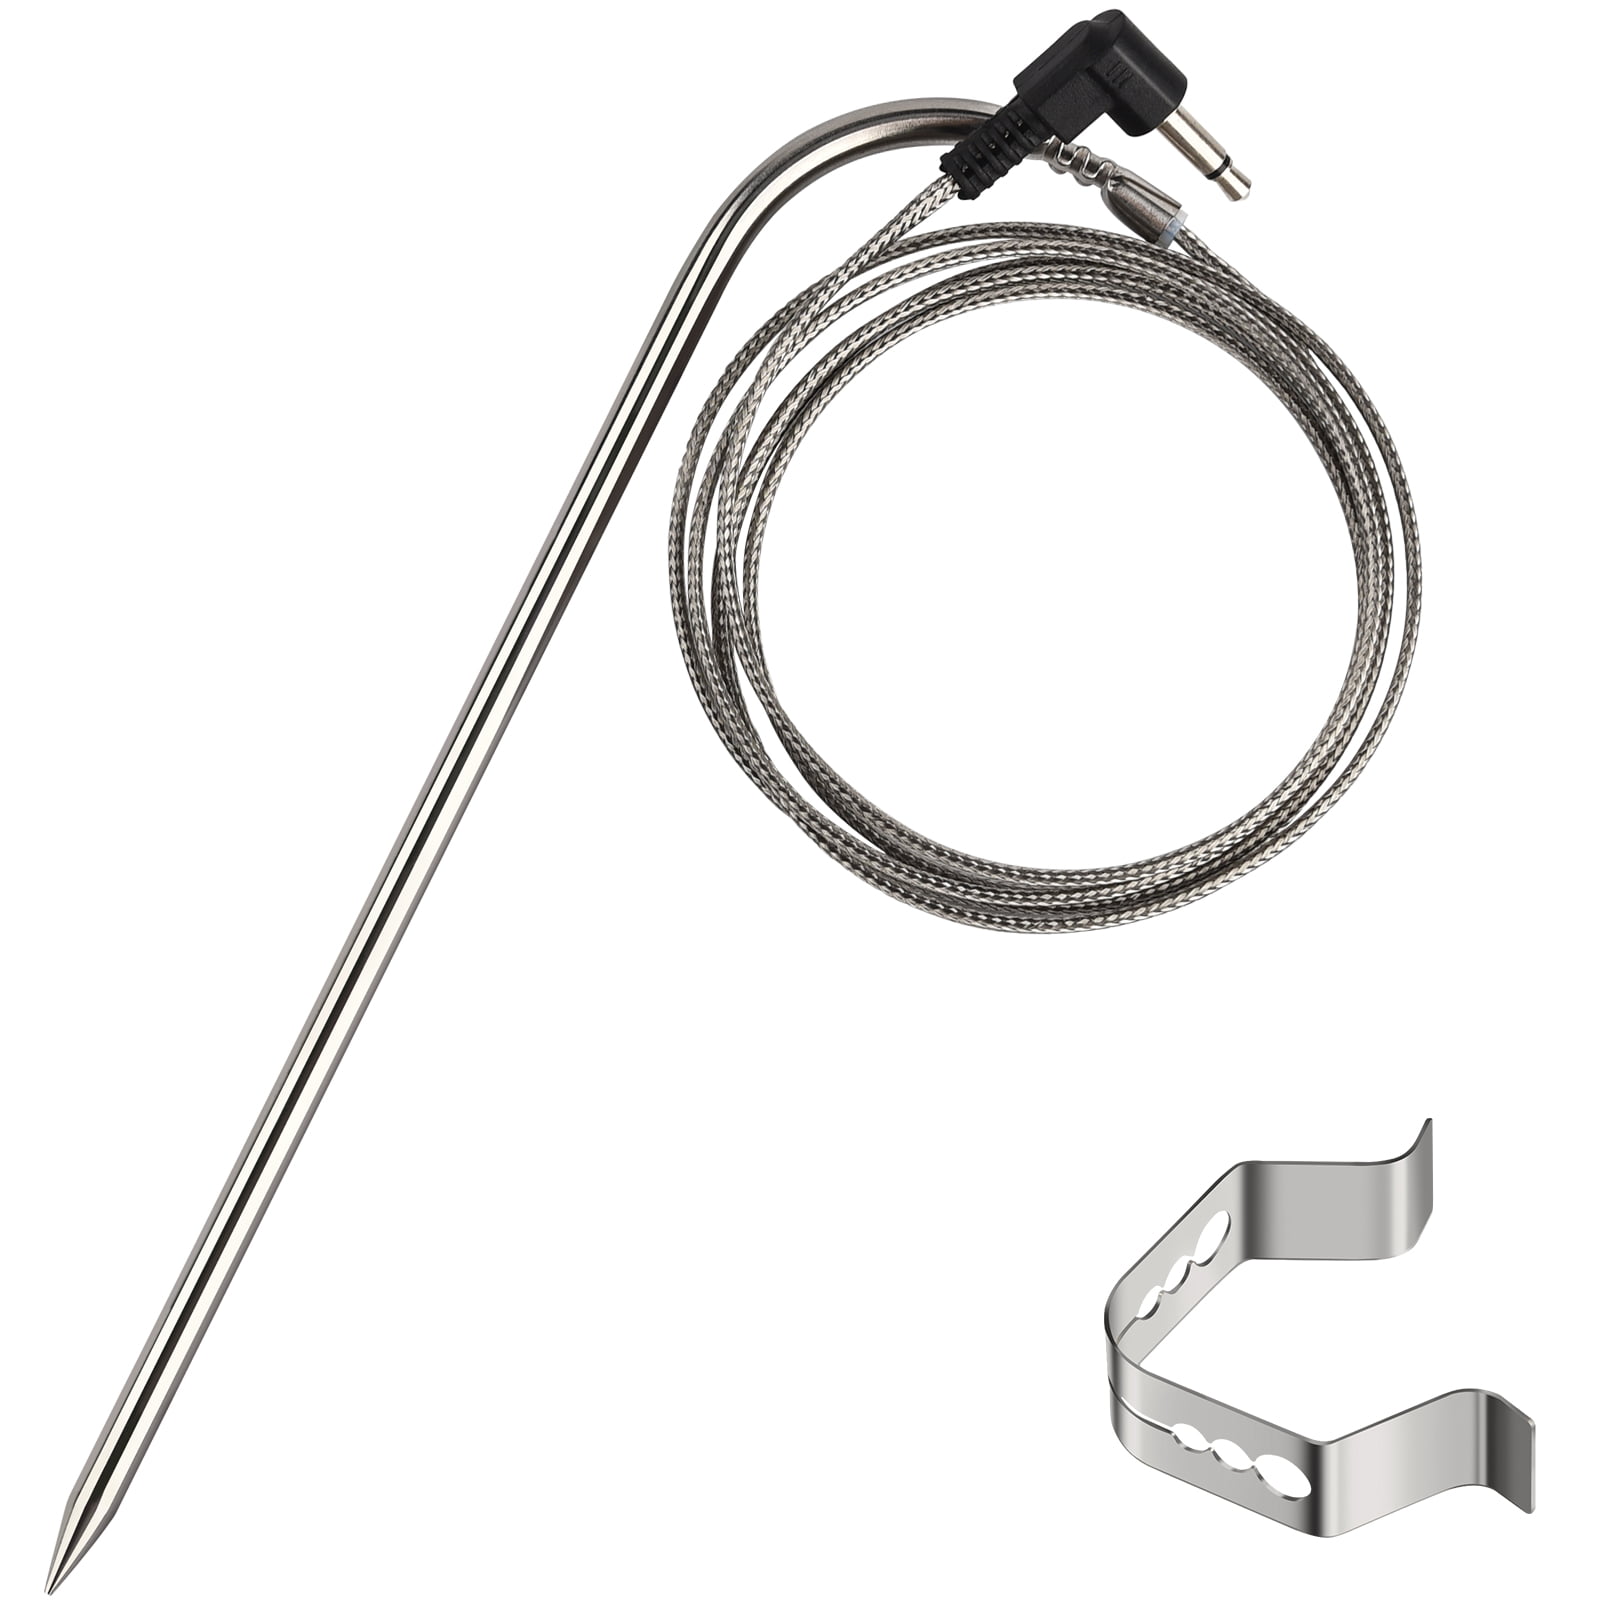 Pit Boss Meat Probe Replacement Pellet Grills BBQ Temperature Probe USA Ship 